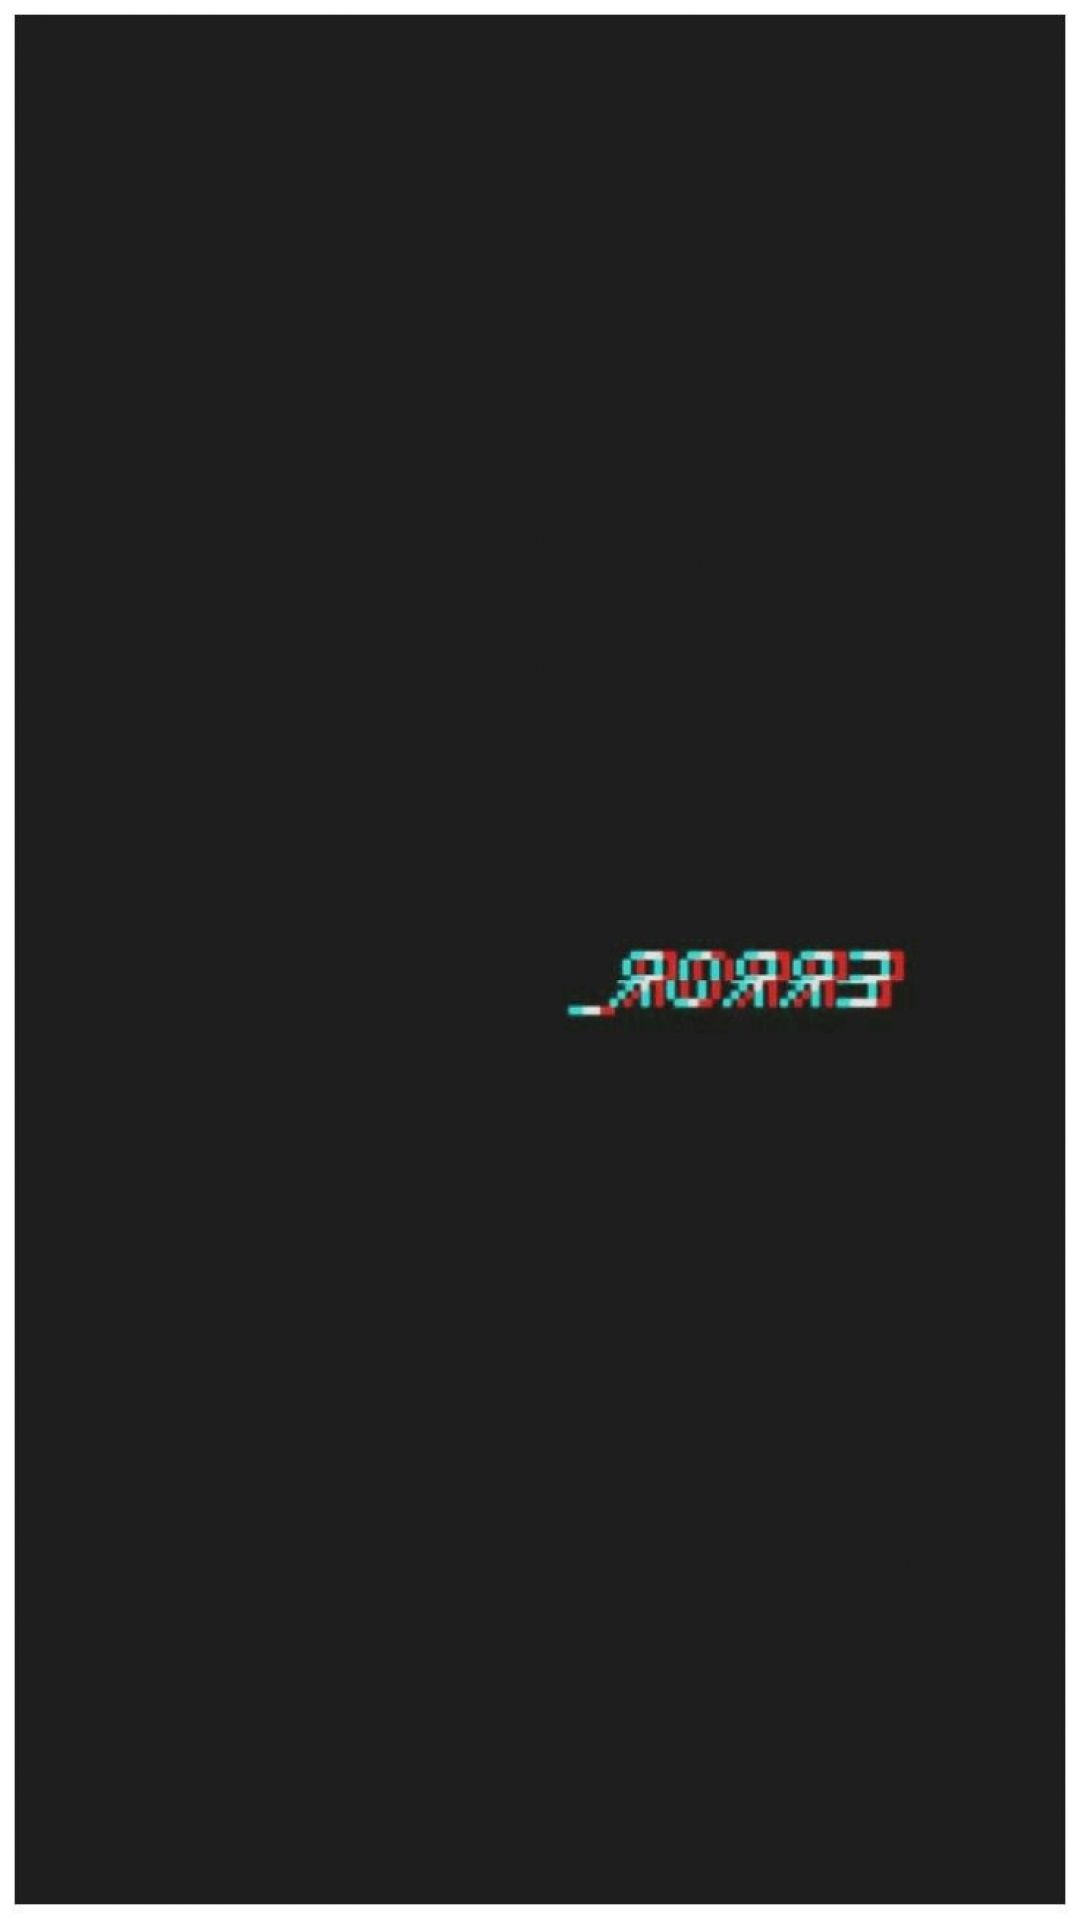 Black Text iPhone Wallpapers - Wallpaper Cave